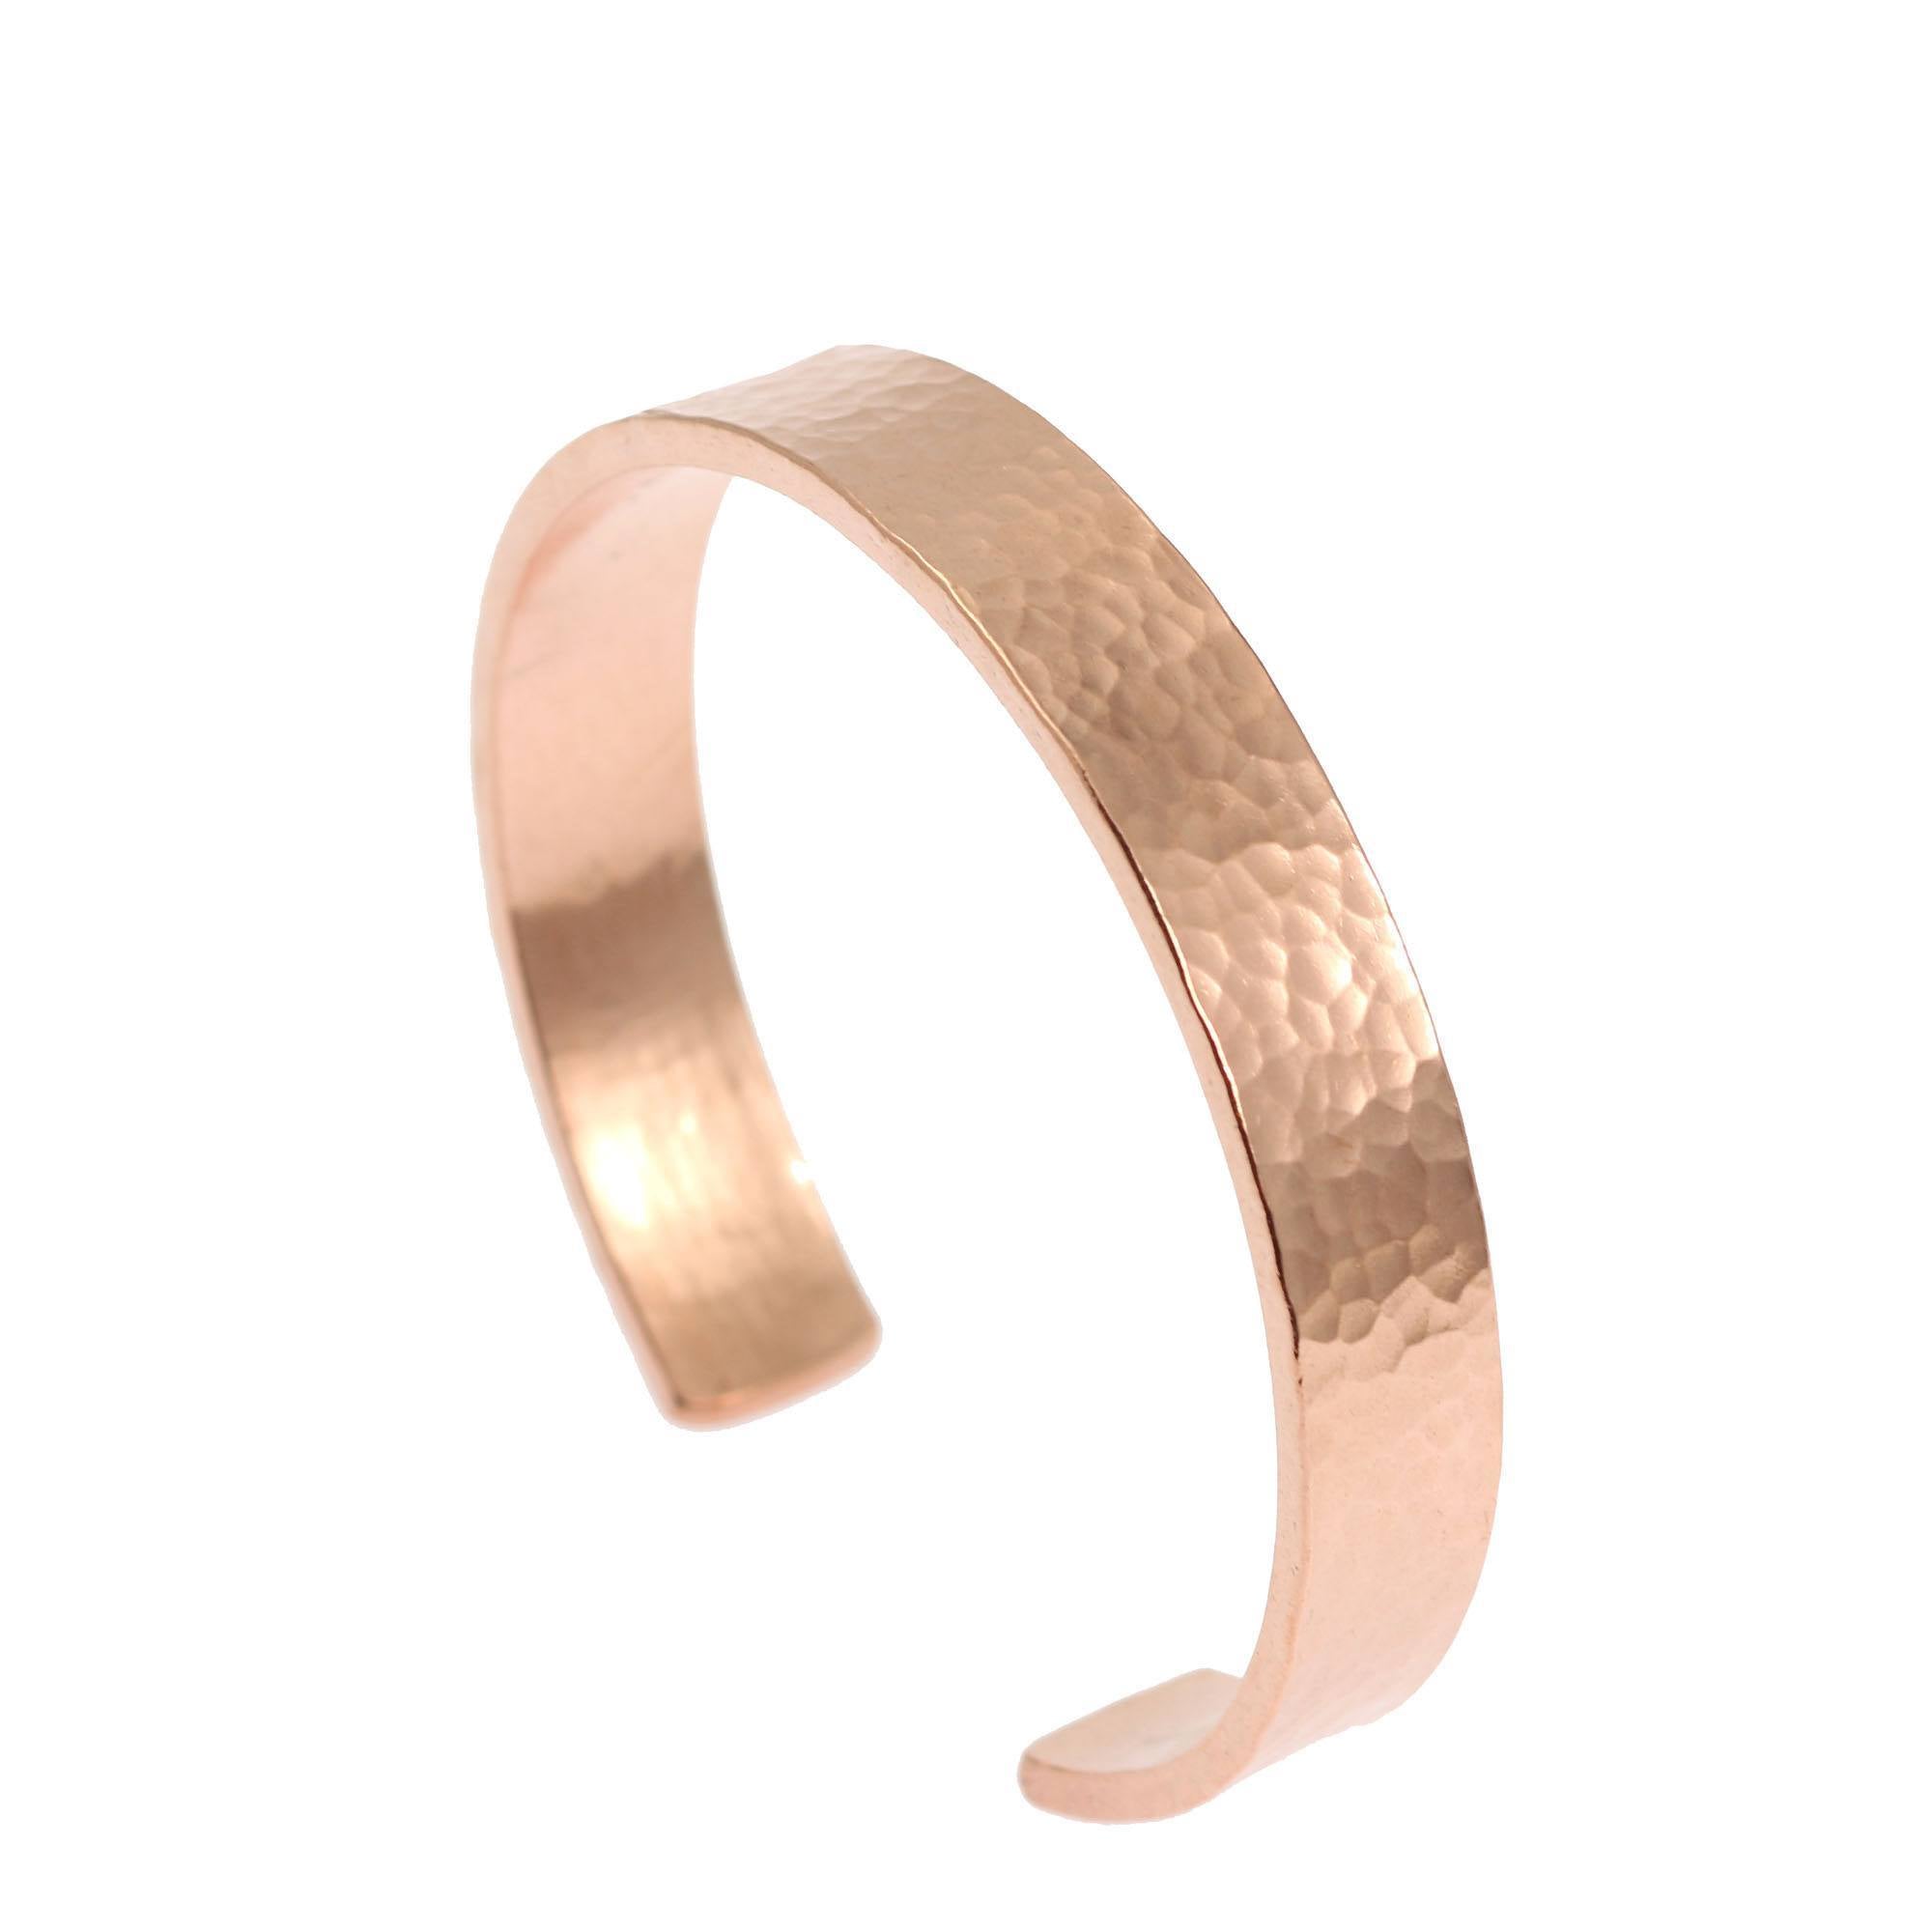 10mm Wide Hammered Copper Cuff Bracelet Right Side View